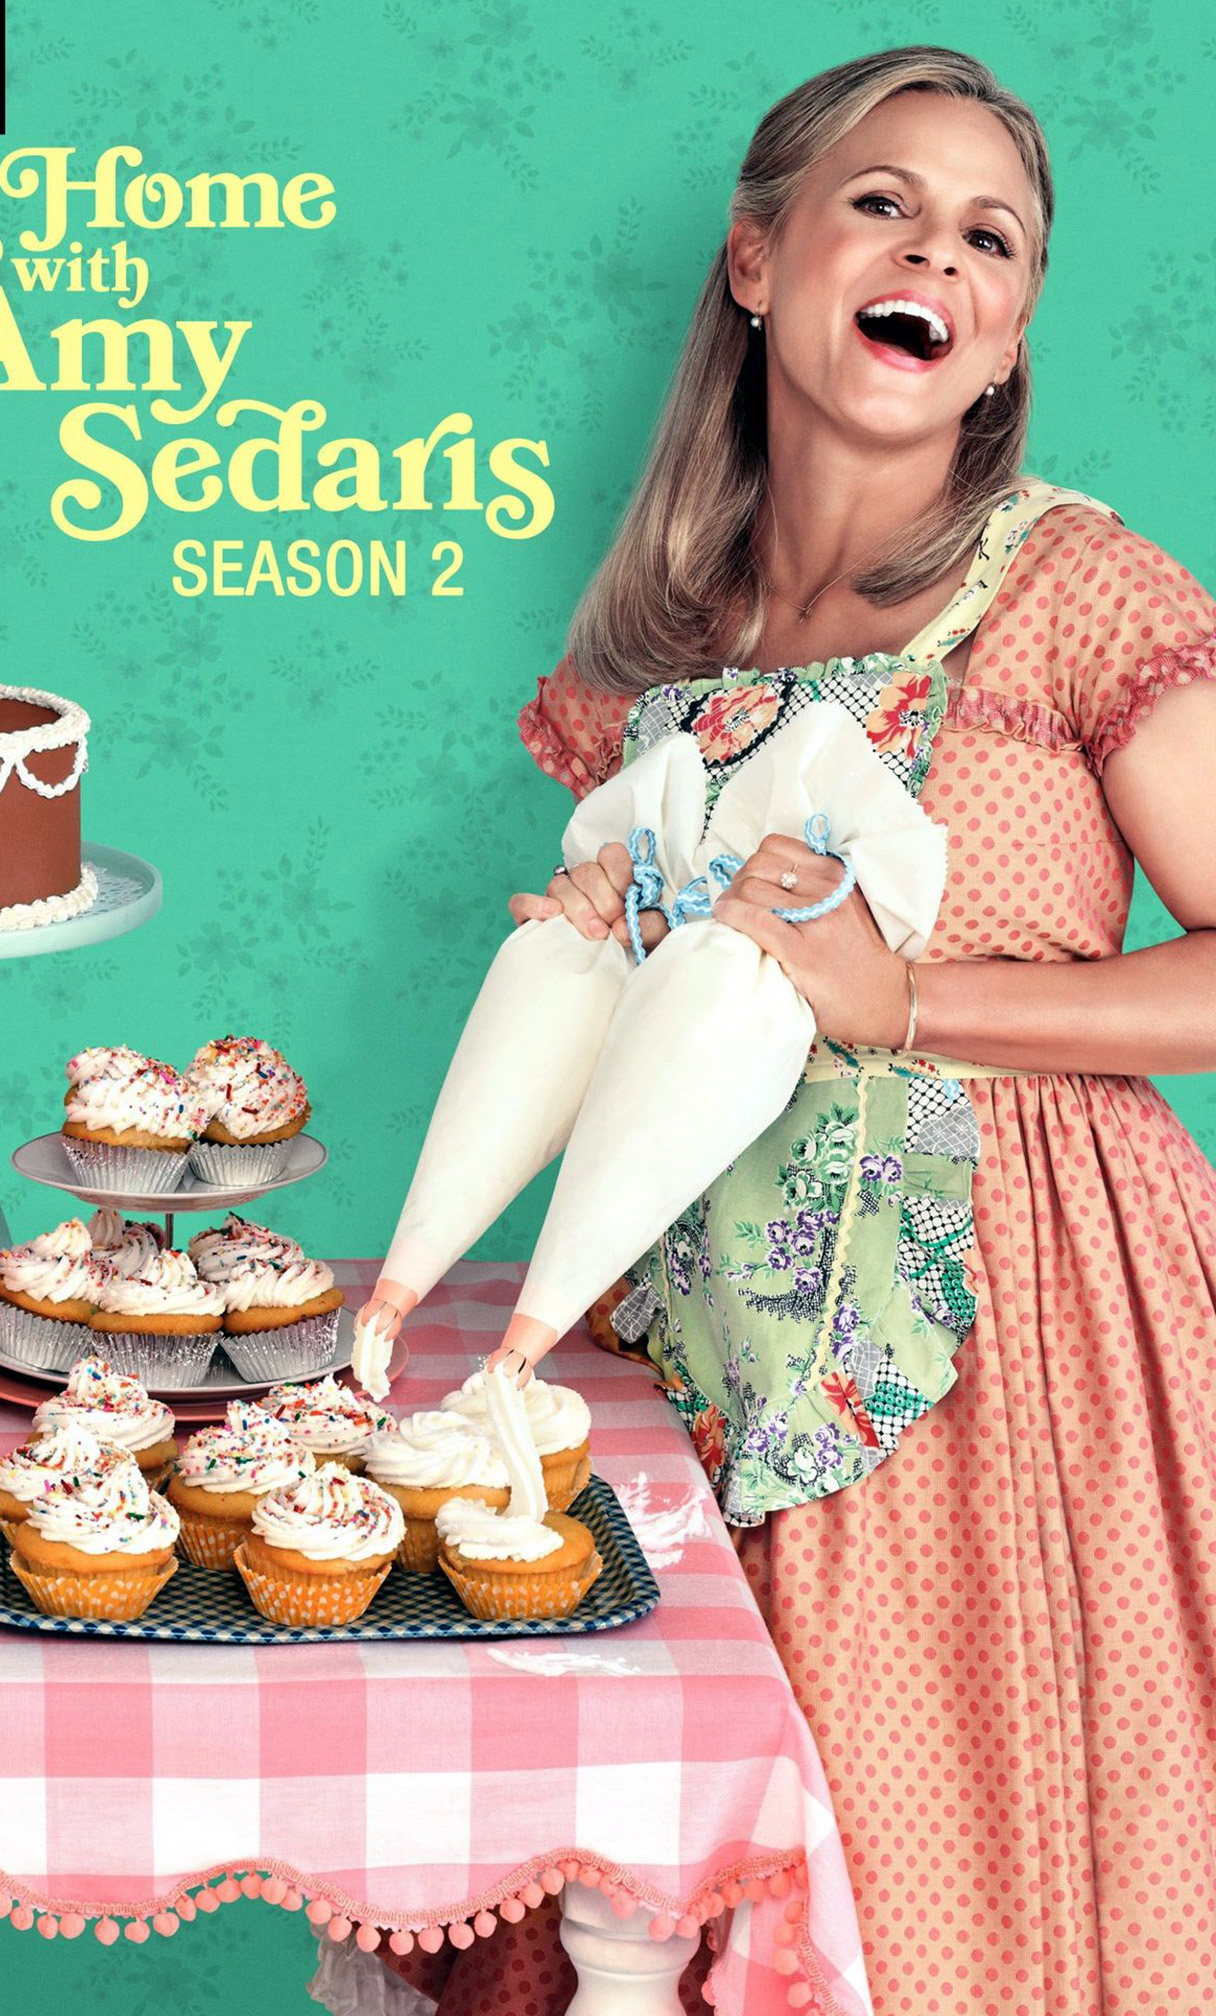 Then check out Amy Sedaris nude and sexy photos from her kitchen and much m...